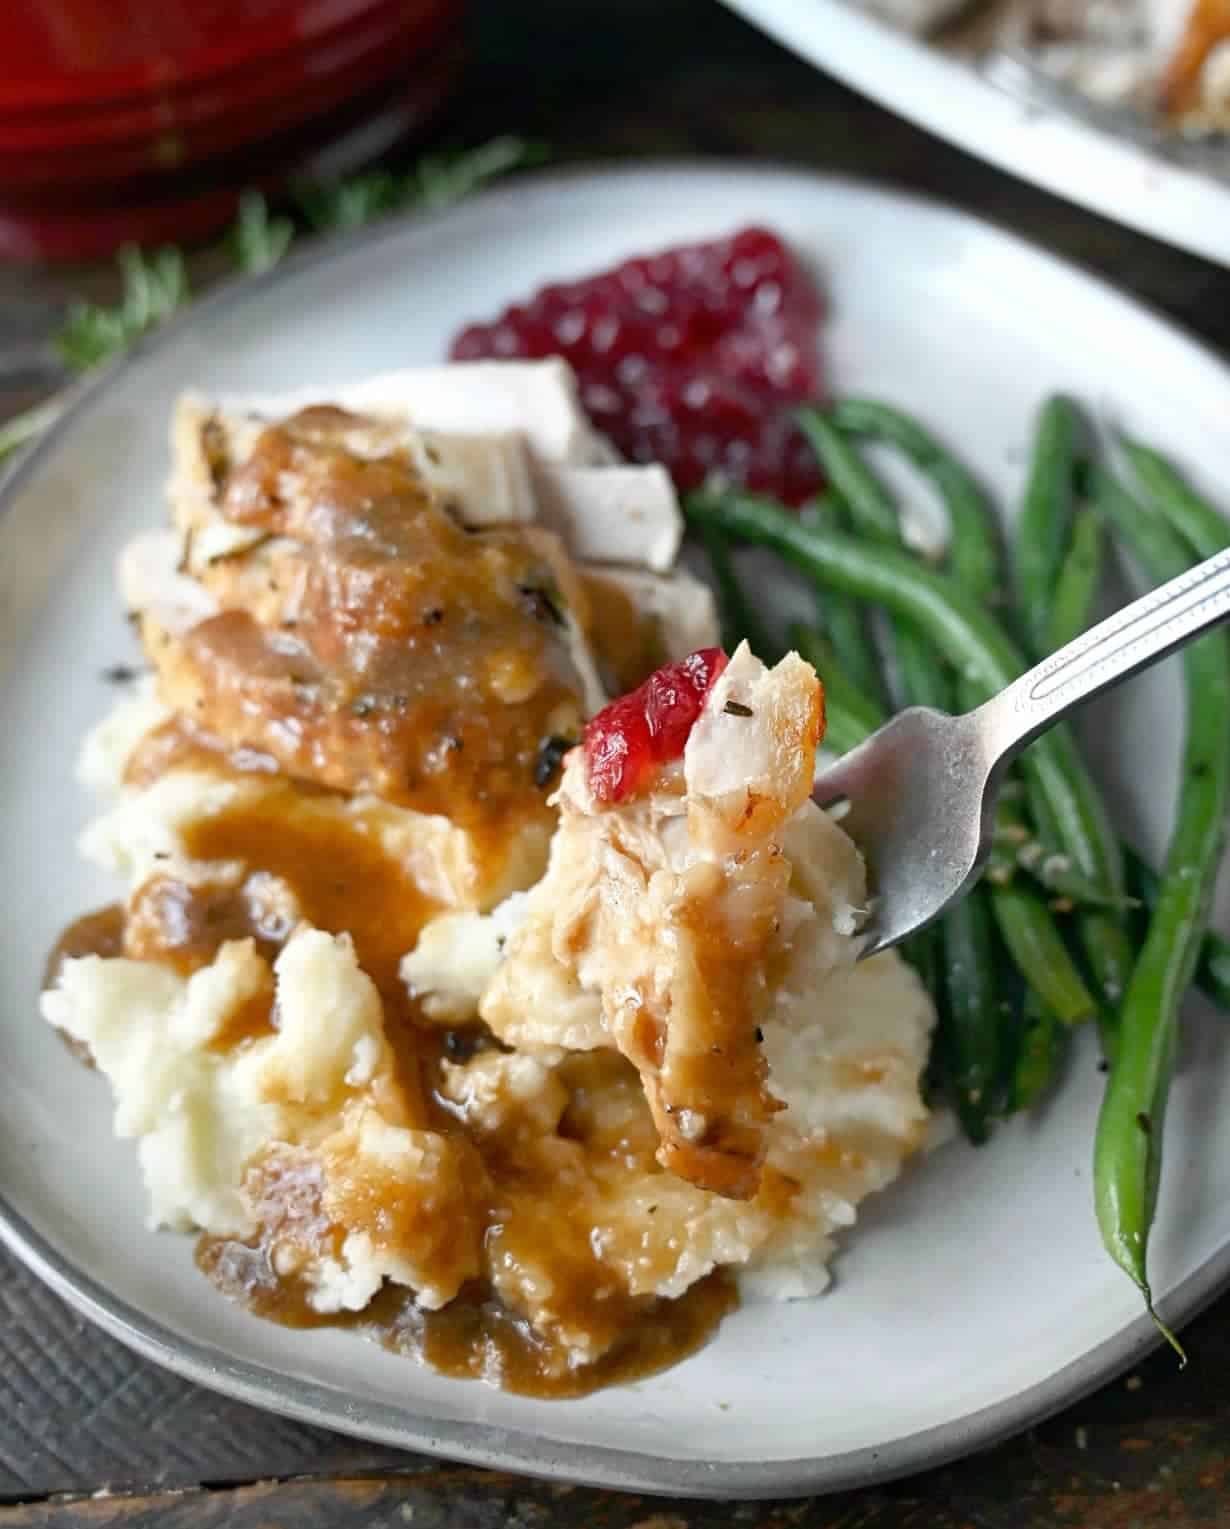 Turkey breast, mashed potatoes and gcranberries on a fork.